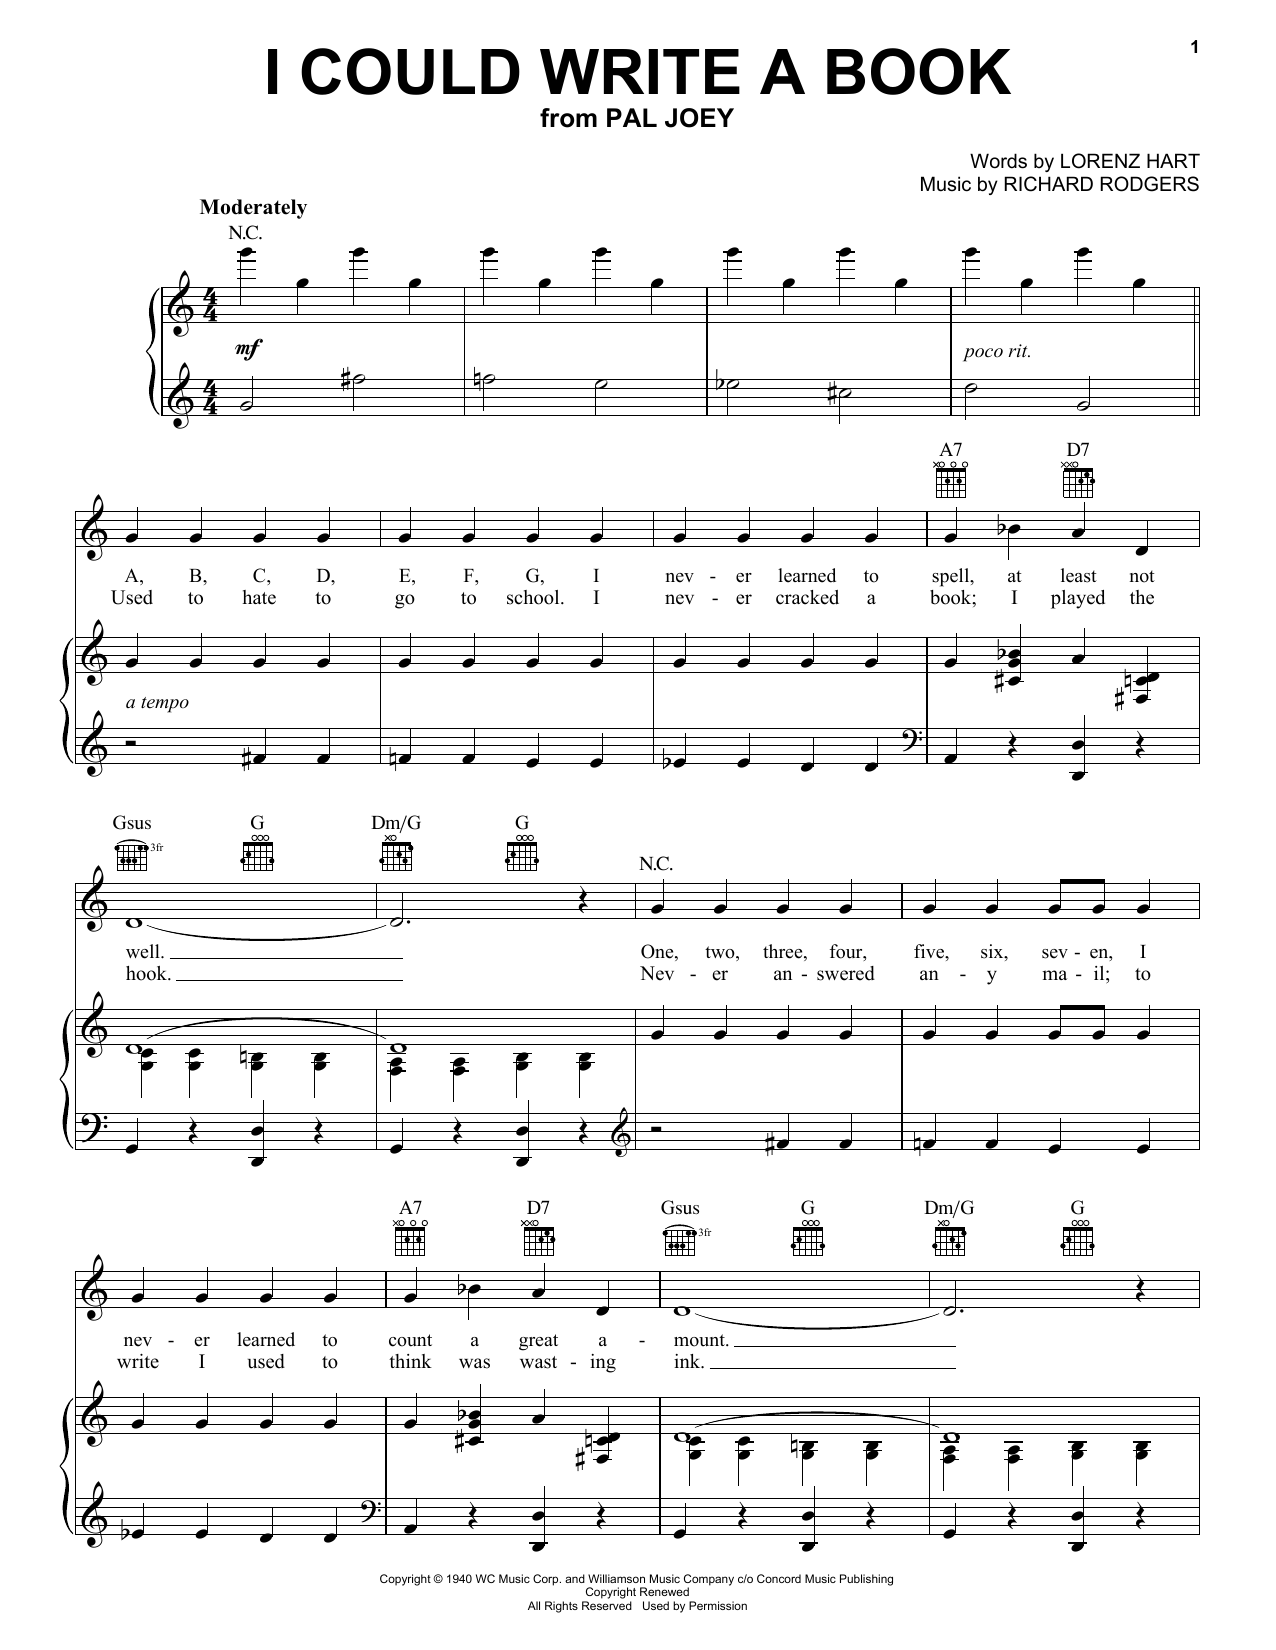 Rodgers & Hart I Could Write A Book sheet music notes and chords. Download Printable PDF.